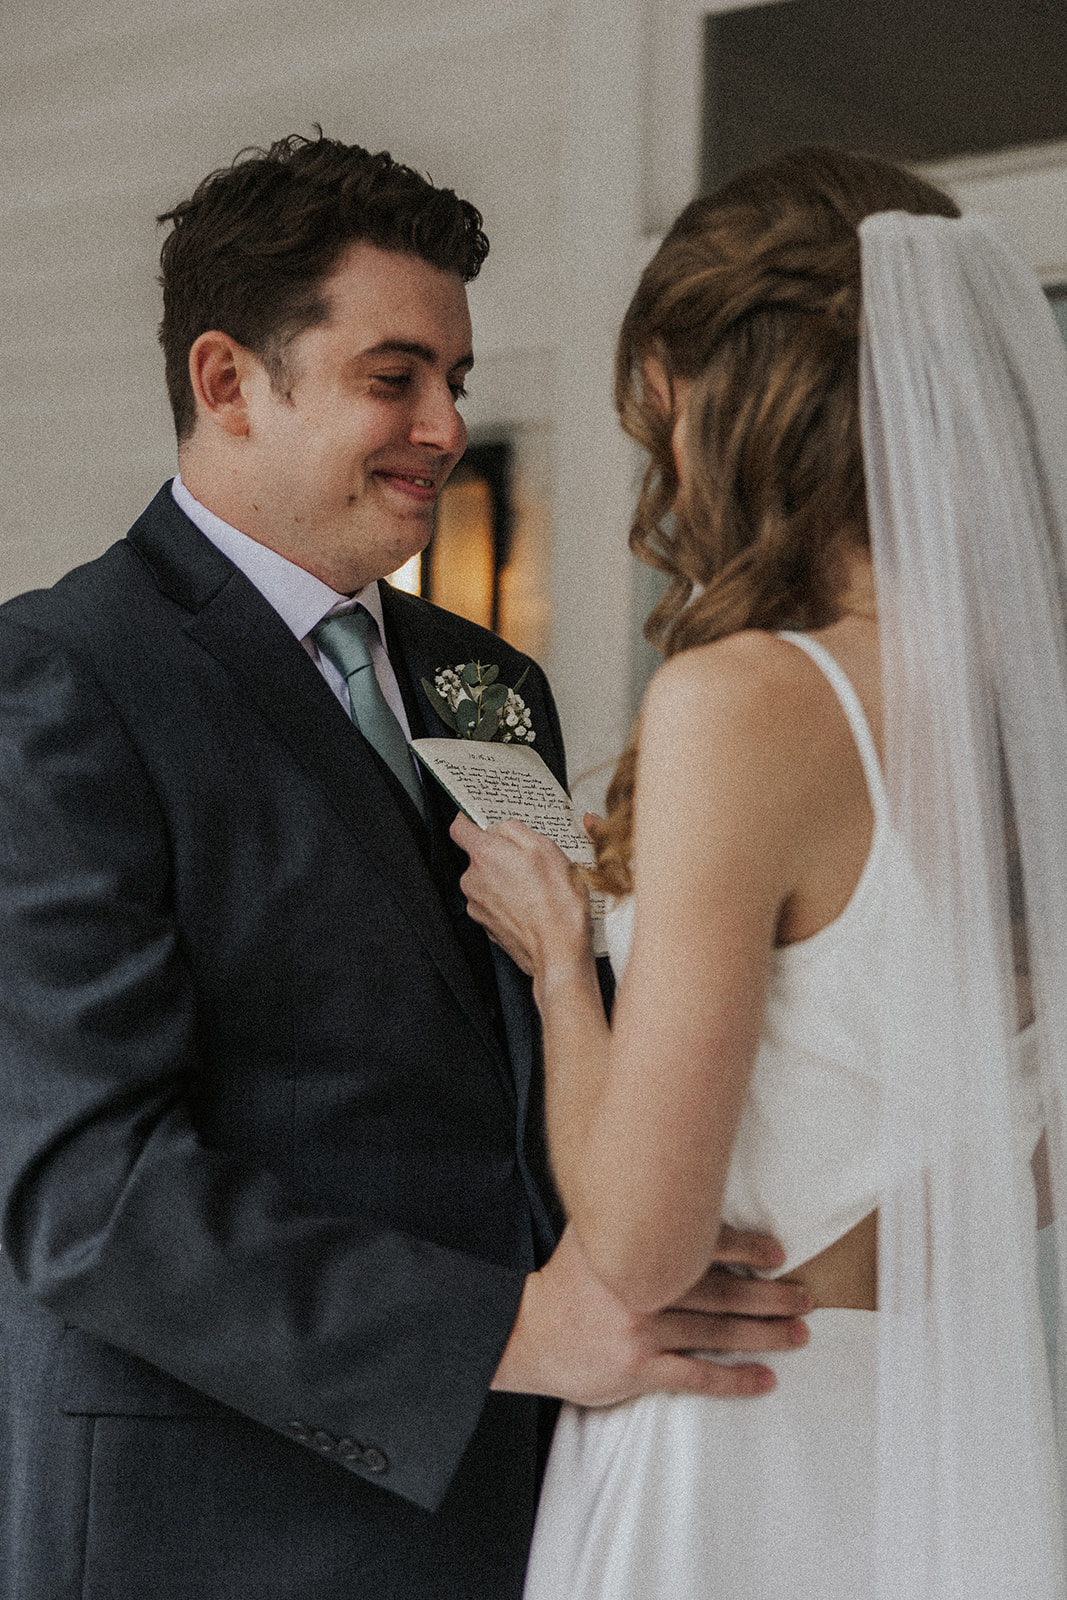 stunning bride and groom share an intimate moment during their private vow ceremony! Learn how to plan your perfect wedding day timeline!